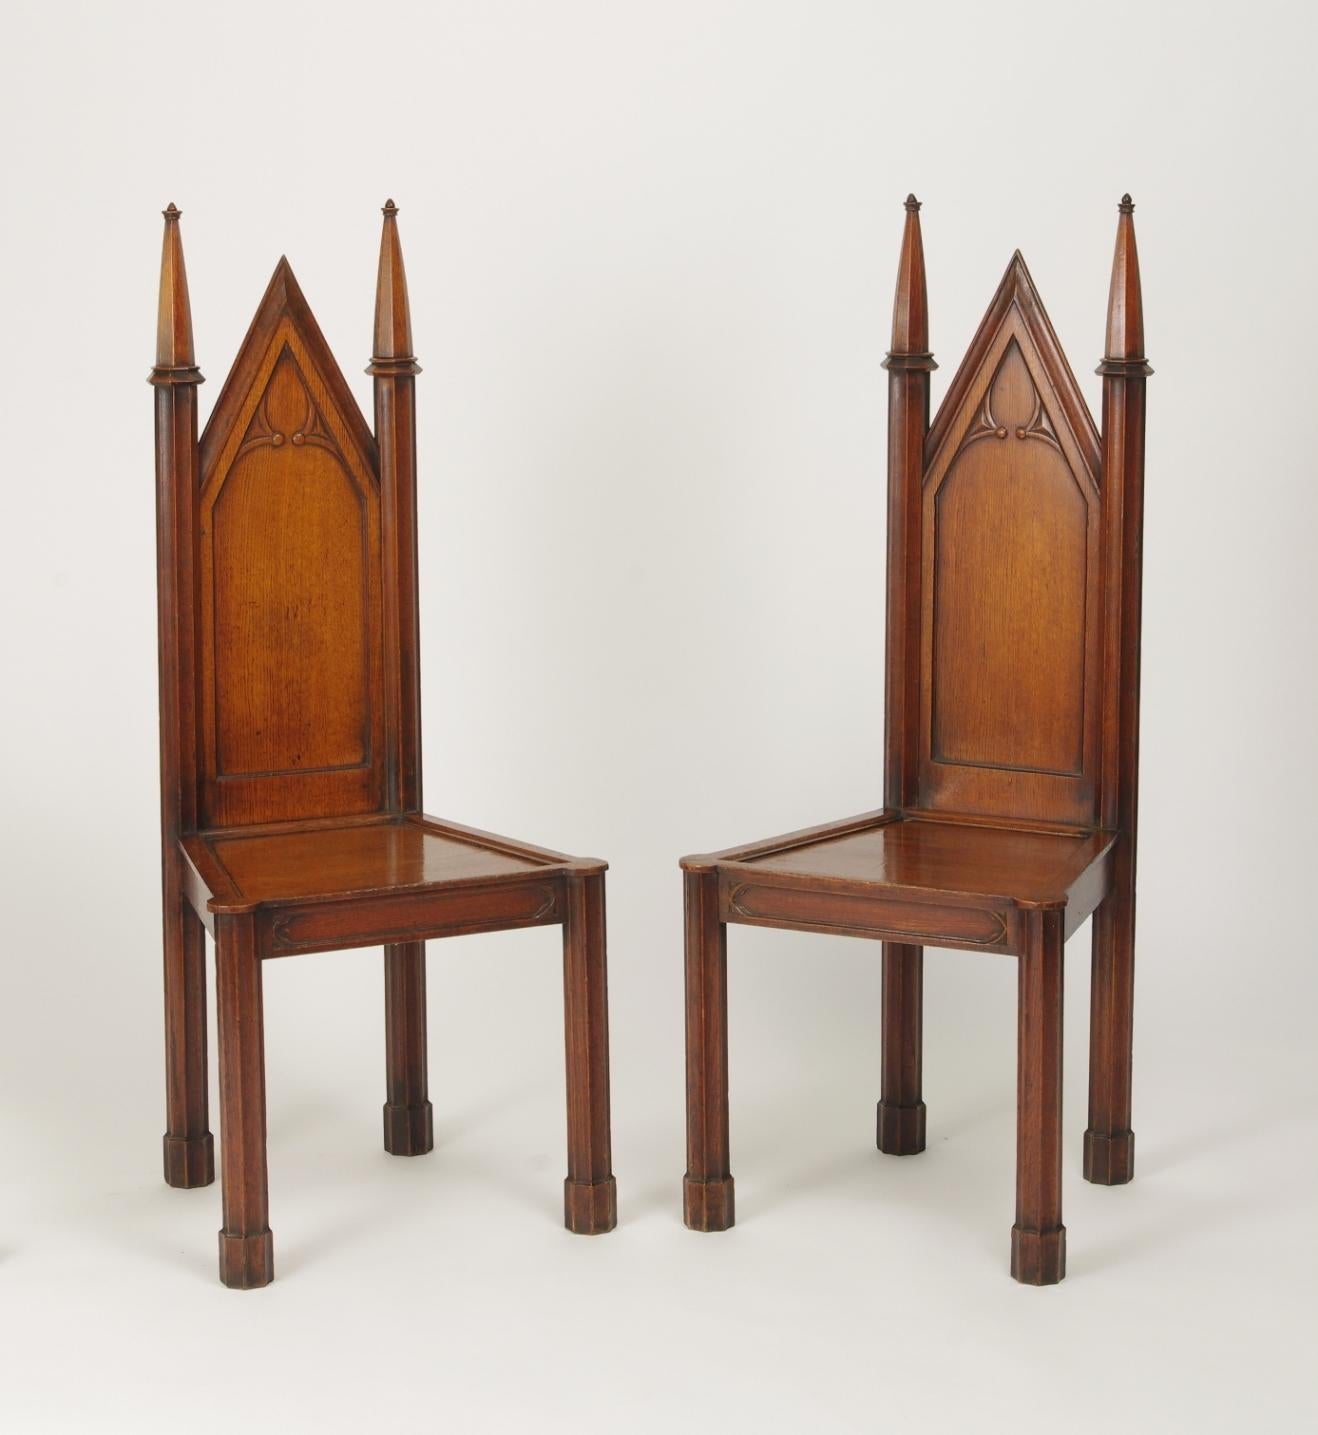 Pair of George III oak gothic hall chairs, each with a gabled back with gothic tracery between fluted spires, the plank seat with a molded edge on an apron with similar tracery and raised on fluted legs with plinth feet.

These stylish chairs,